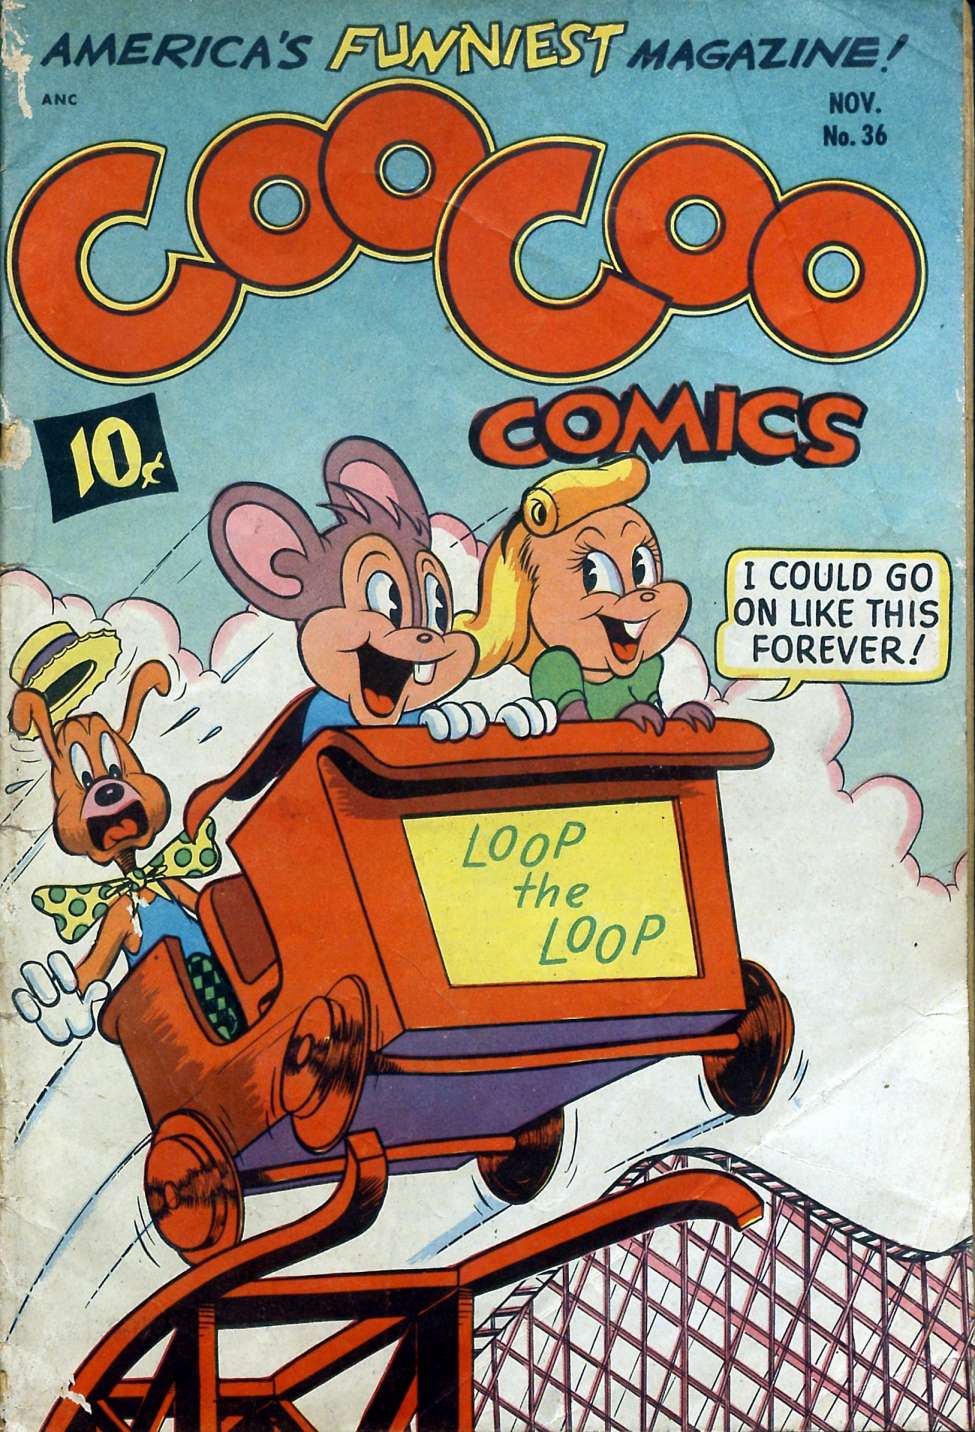 Book Cover For Coo Coo Comics 36